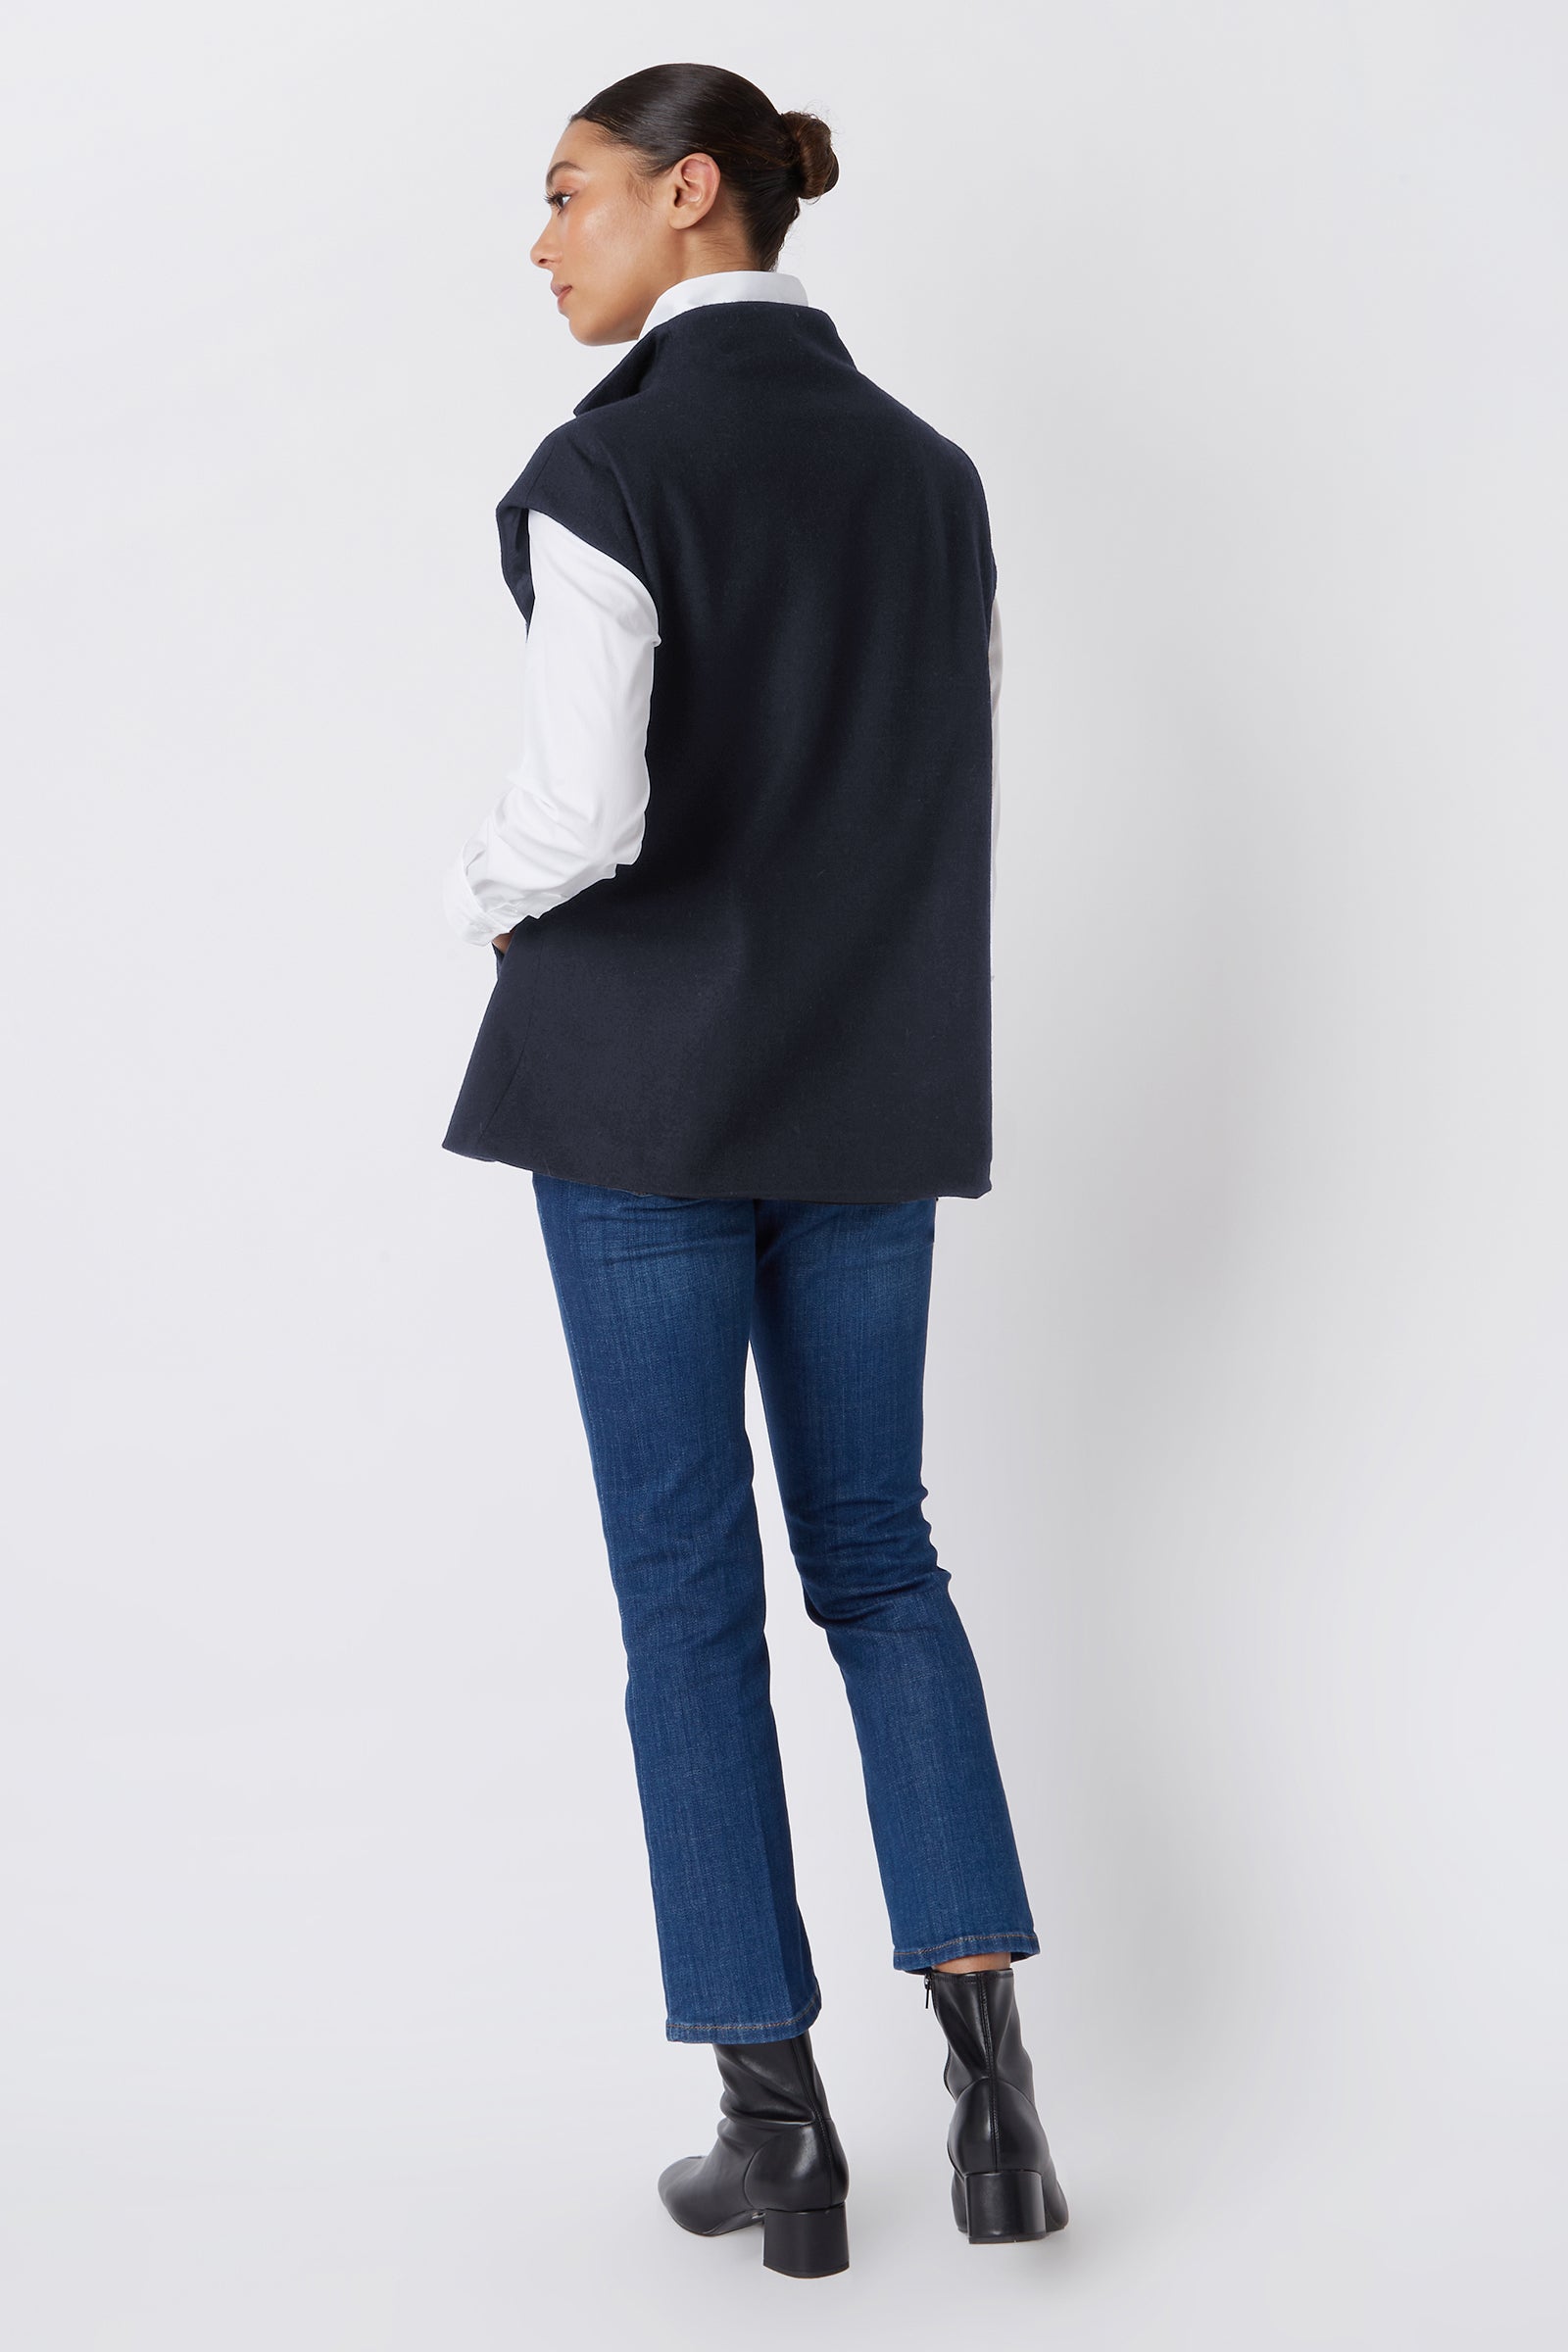 Kal Rieman Anne Collared Zip Vest in Midnight Felted Jersey on Model Full Back View